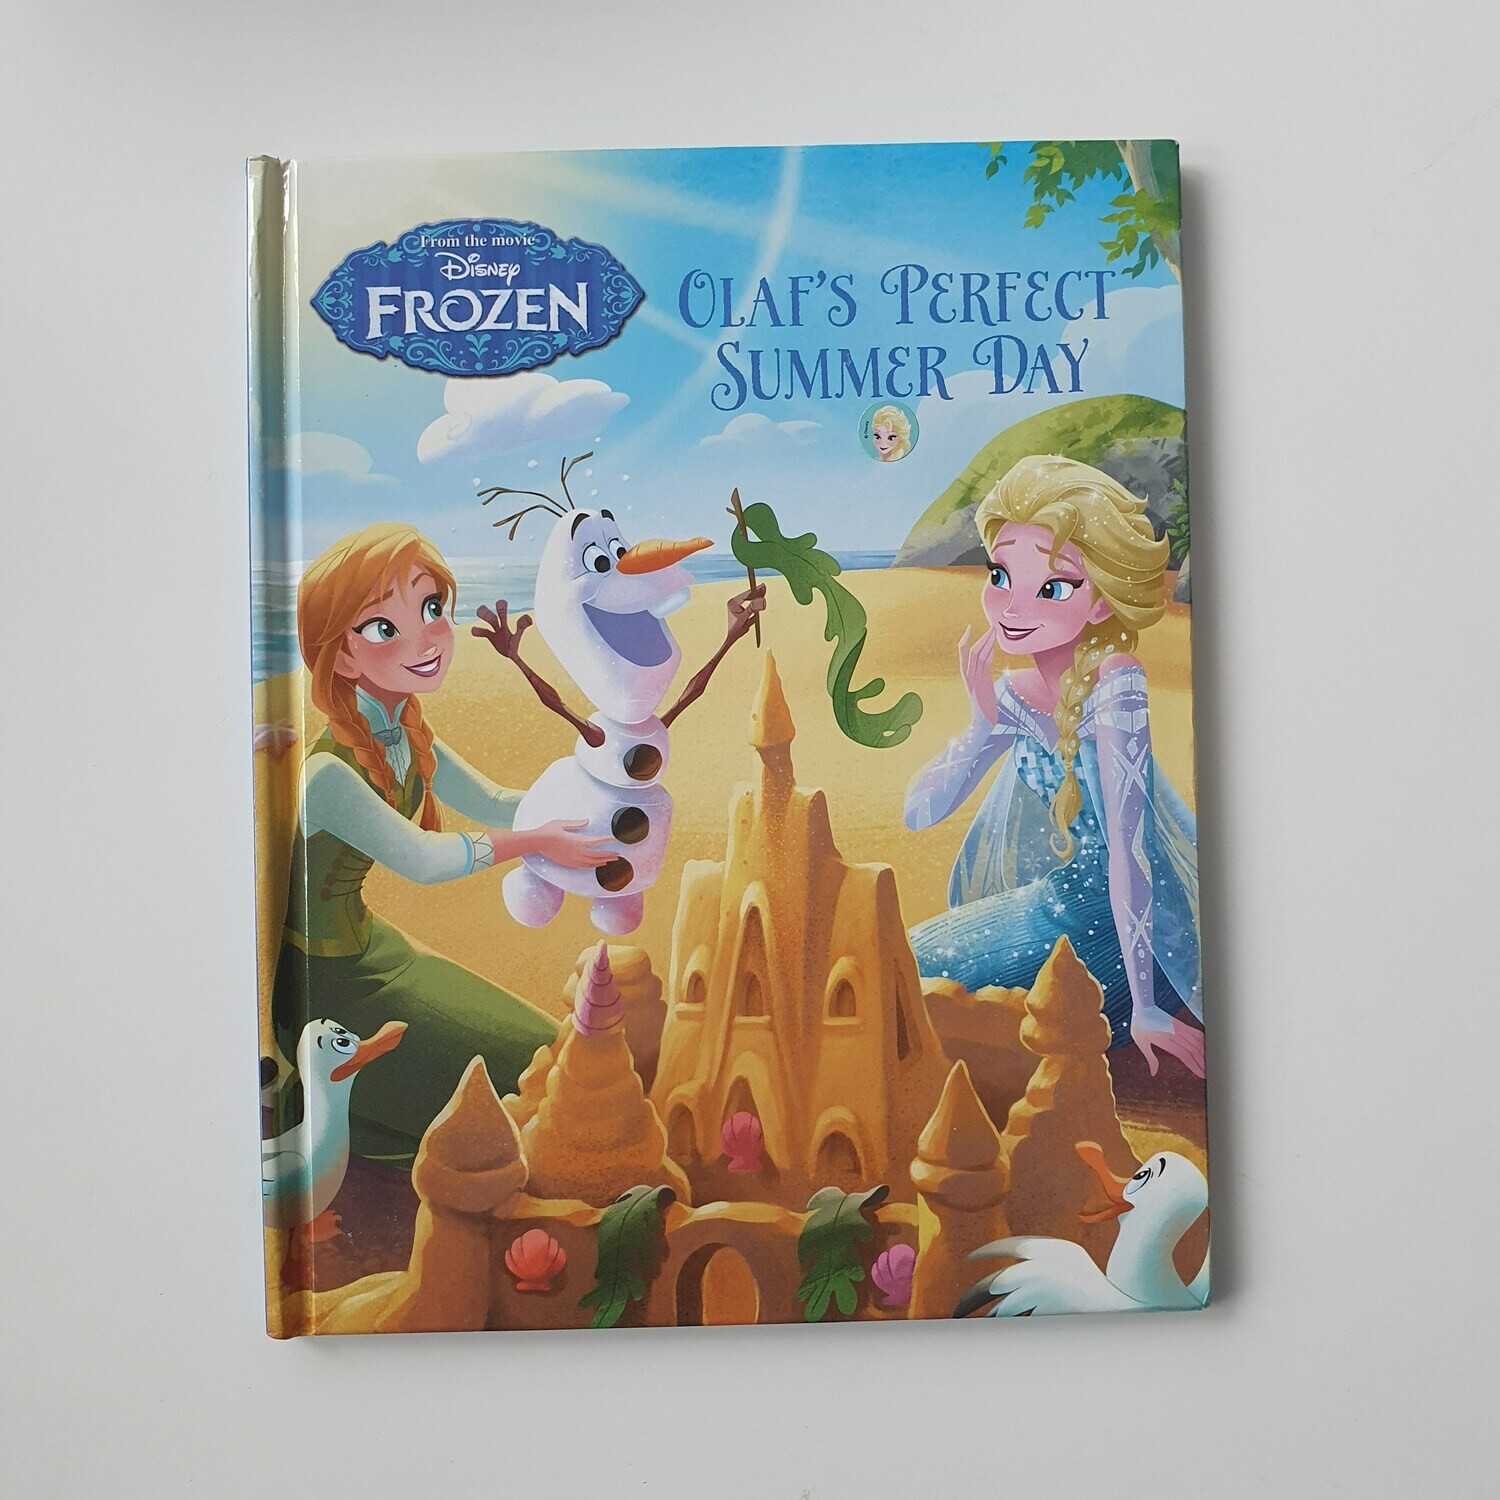 Frozen Olaf's Perfect Summer Day - no original book pages